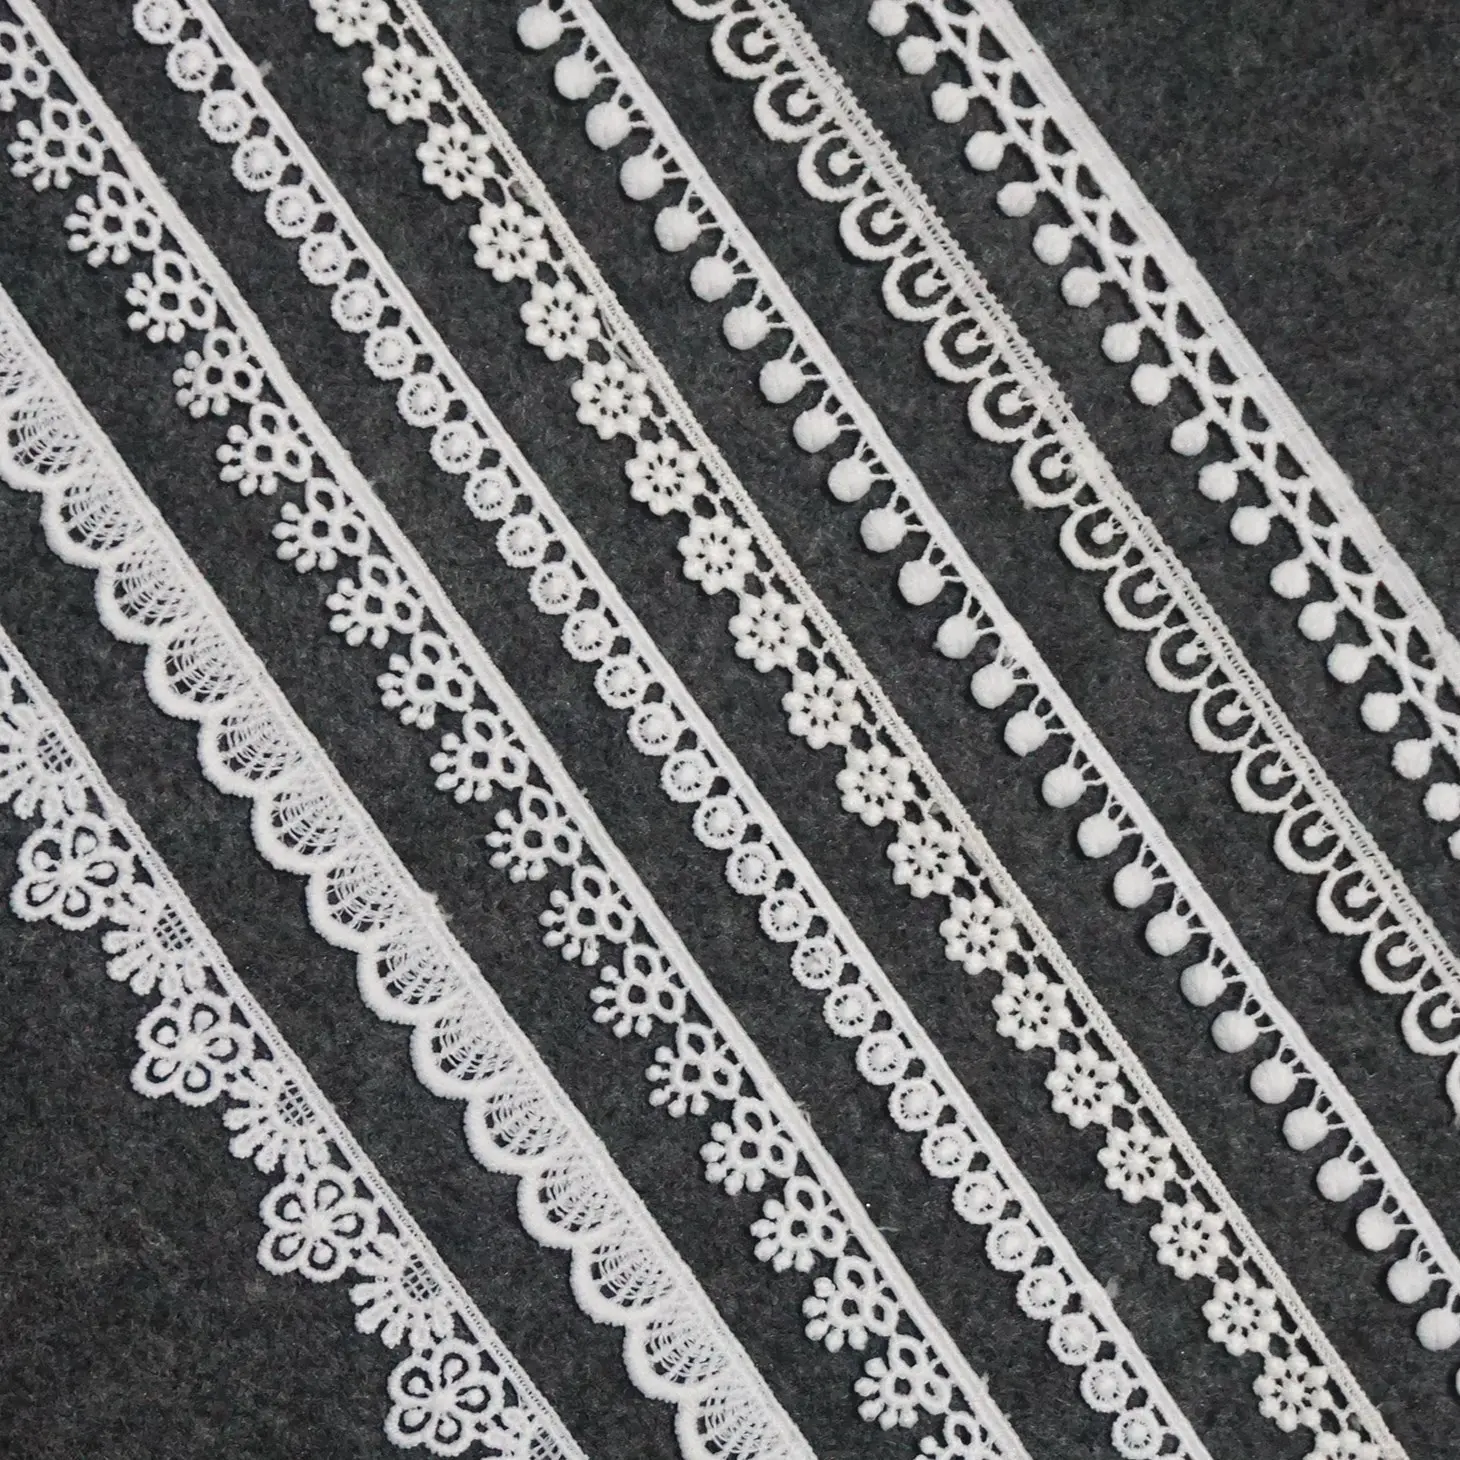 Wonderful water soluble lace trim cotton ribbons stock under garment